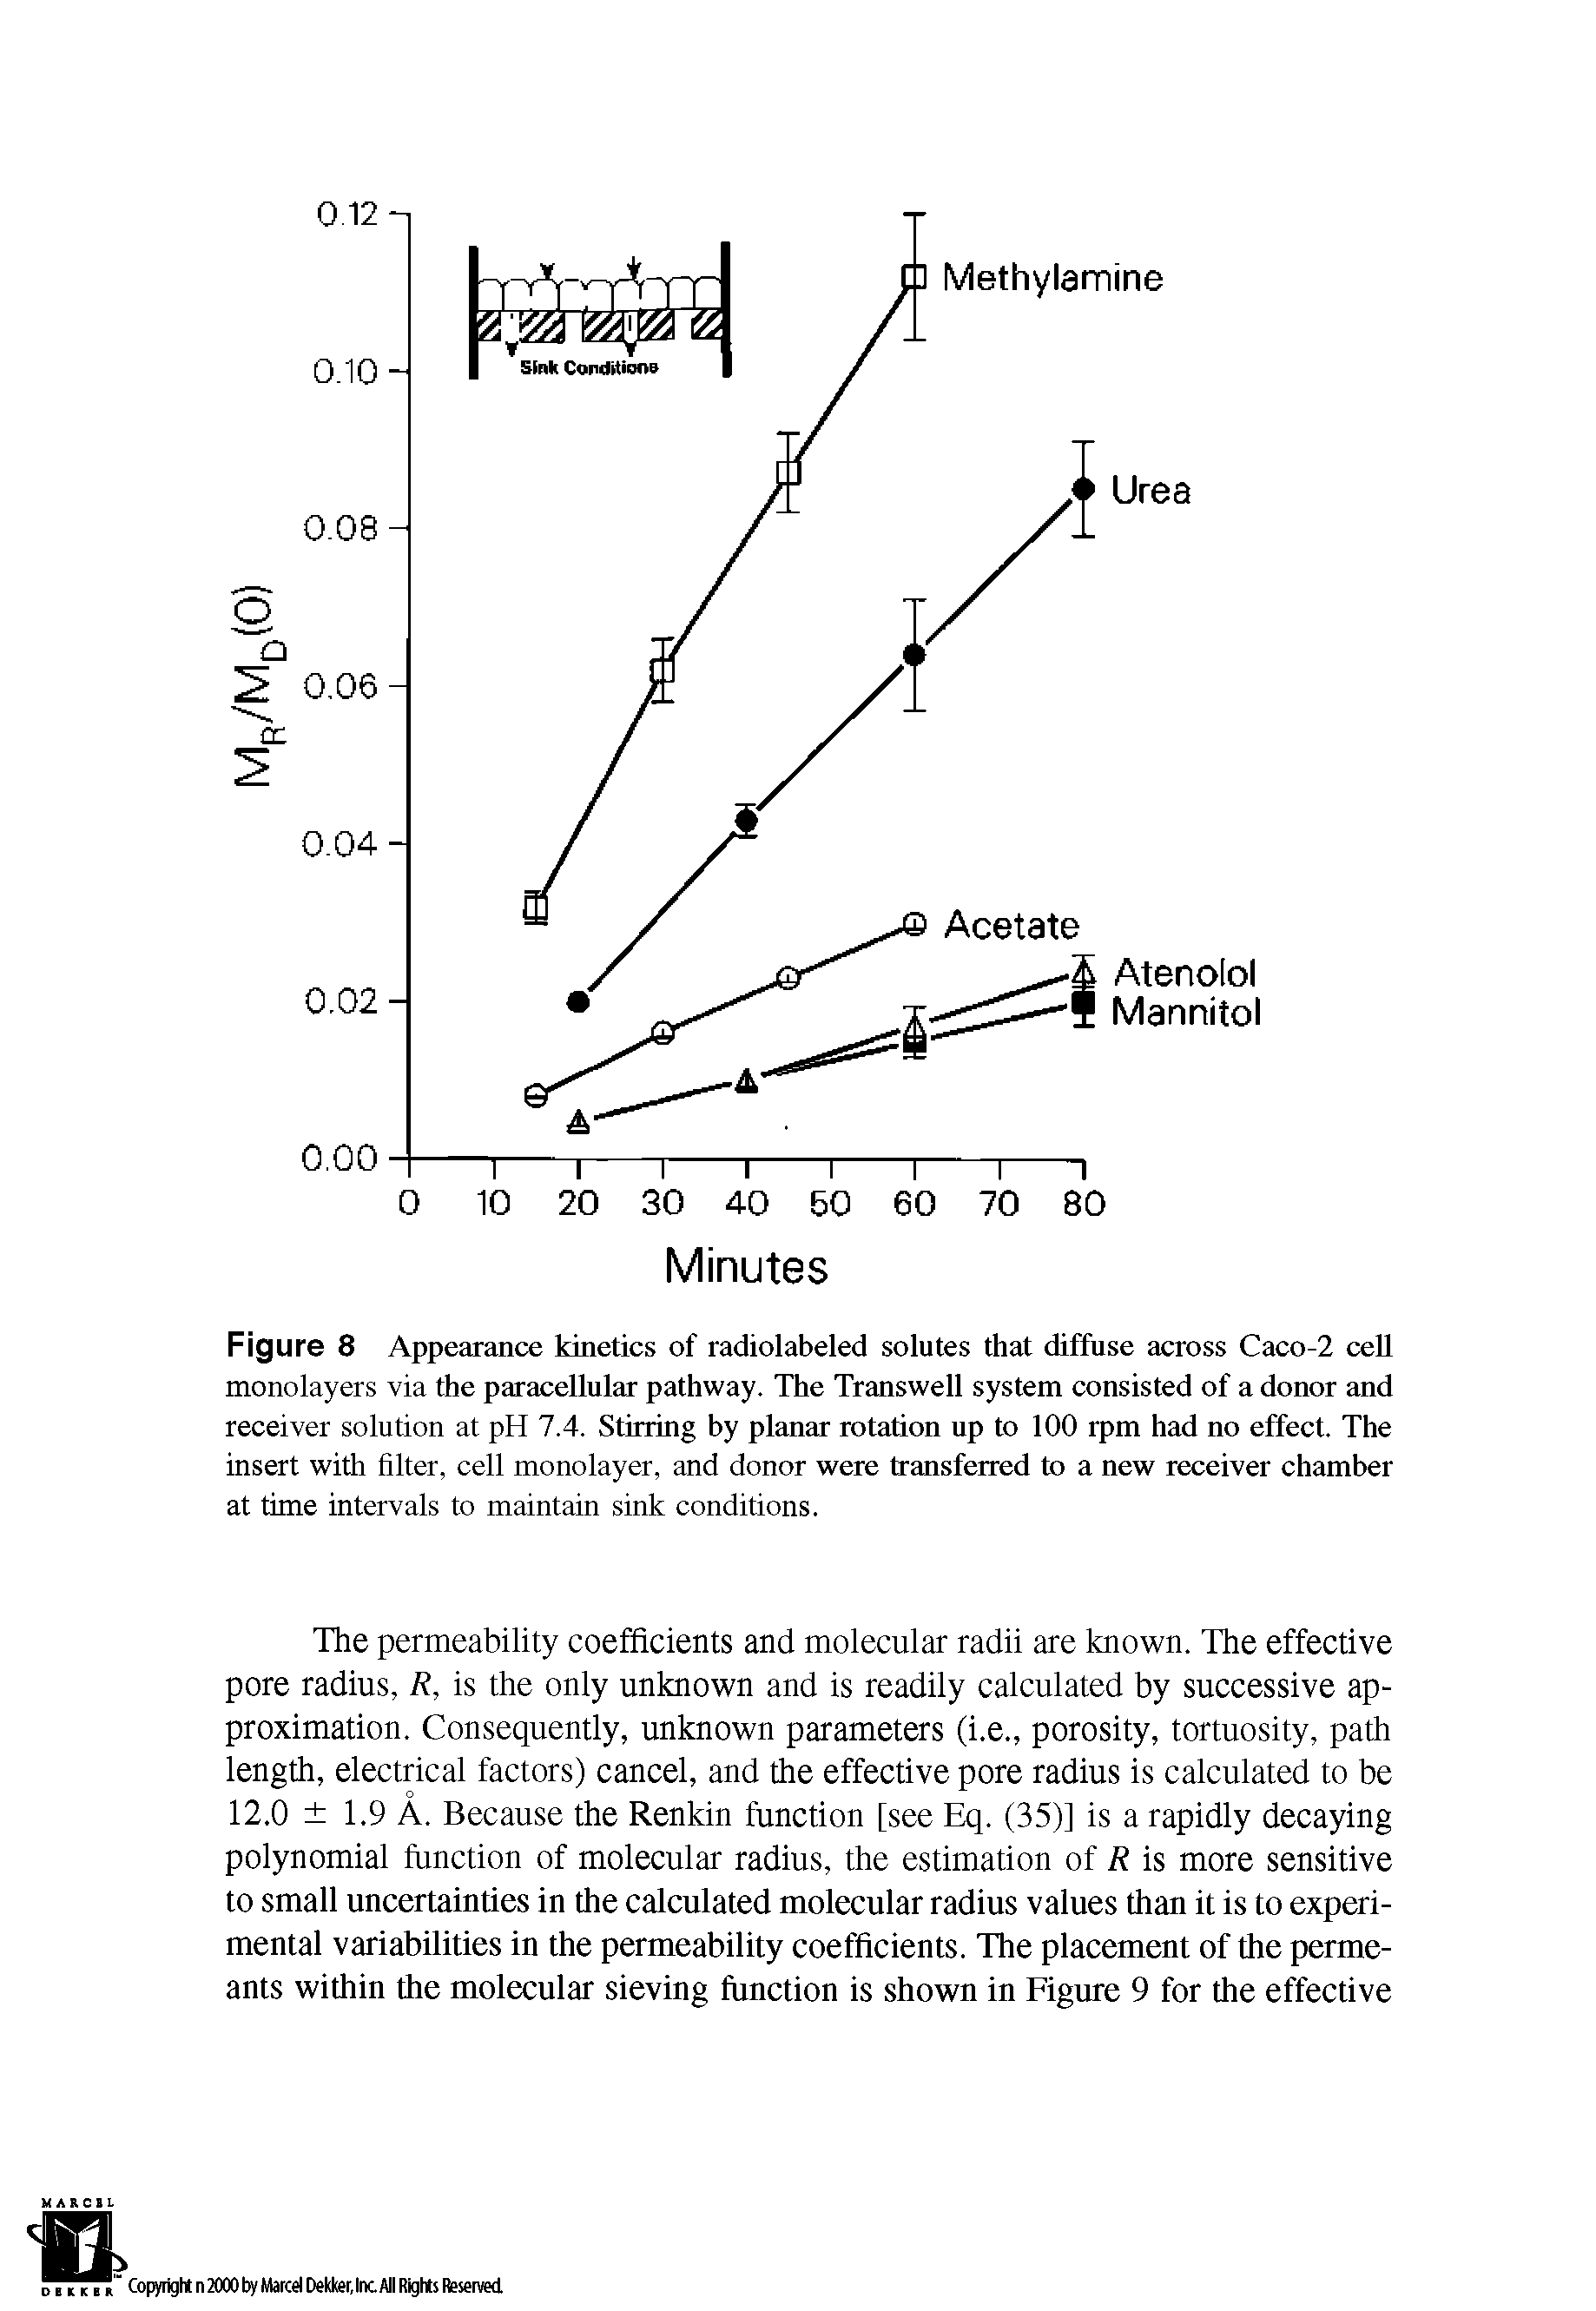 Figure 8 Appearance kinetics of radiolabeled solutes that diffuse across Caco-2 cell monolayers via the paracellular pathway. The Transwell system consisted of a donor and receiver solution at pH 7.4. Stirring by planar rotation up to 100 rpm had no effect. The insert with filter, cell monolayer, and donor were transferred to a new receiver chamber at time intervals to maintain sink conditions.